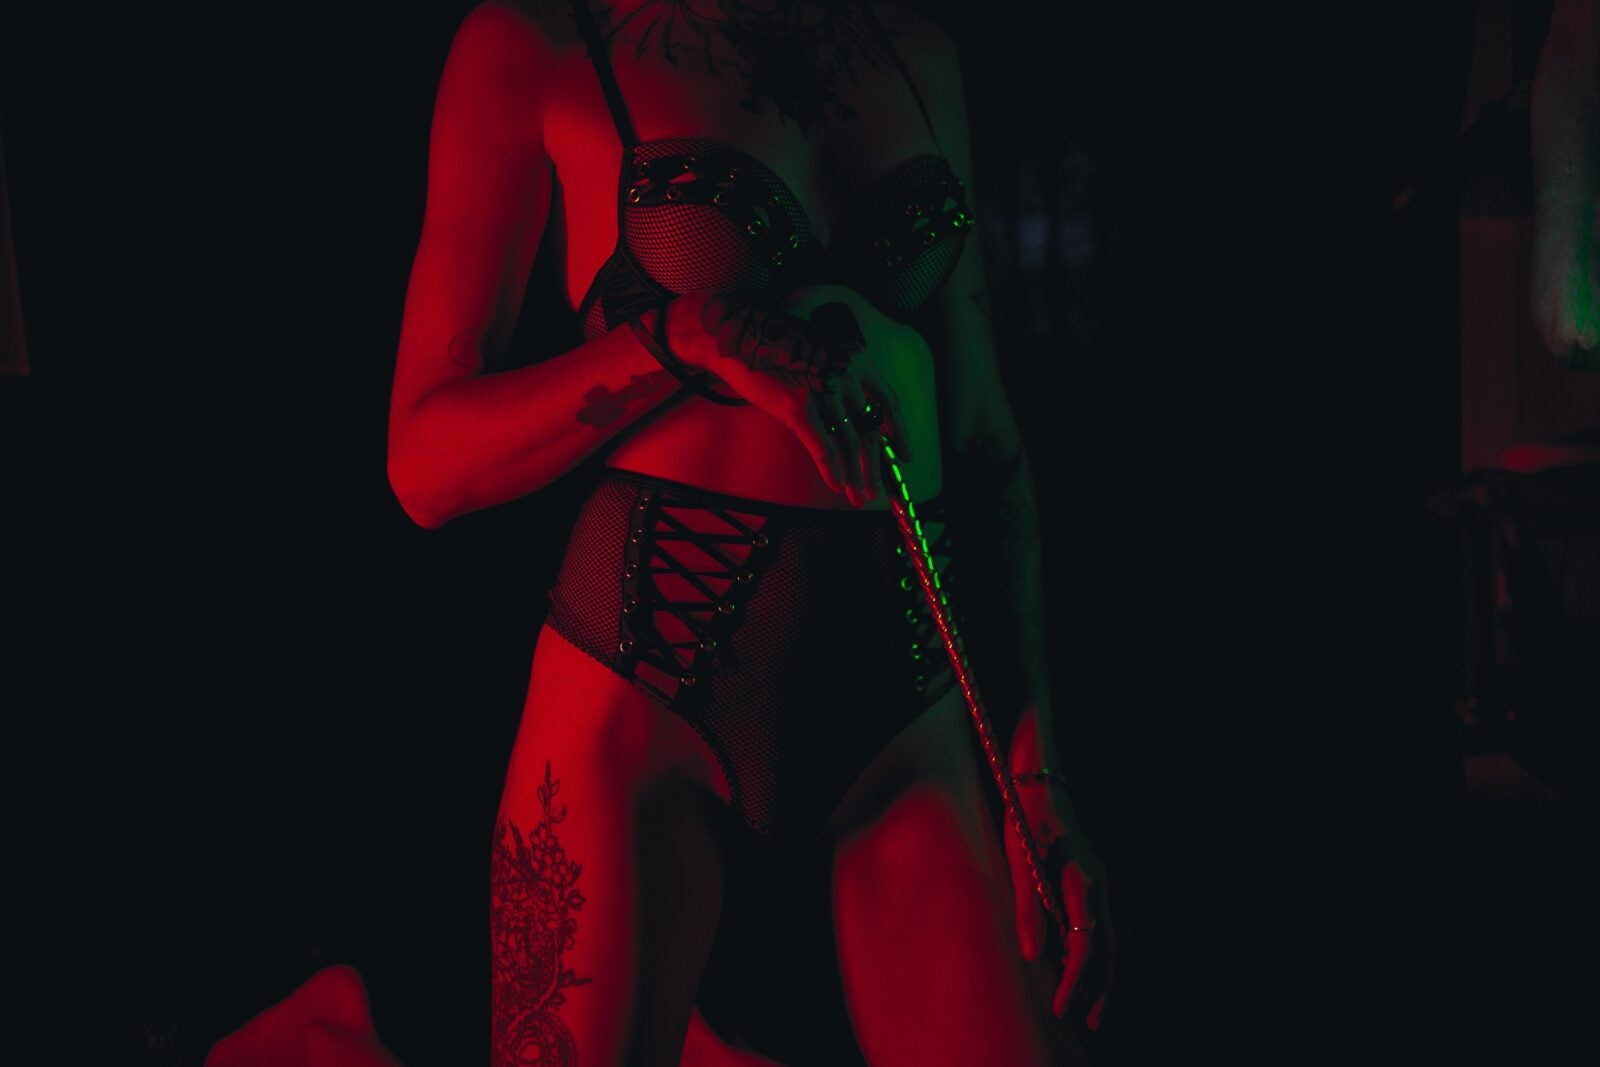 A woman dressed in lingerie and holding a whip in the dark illuminated with a dull red light.